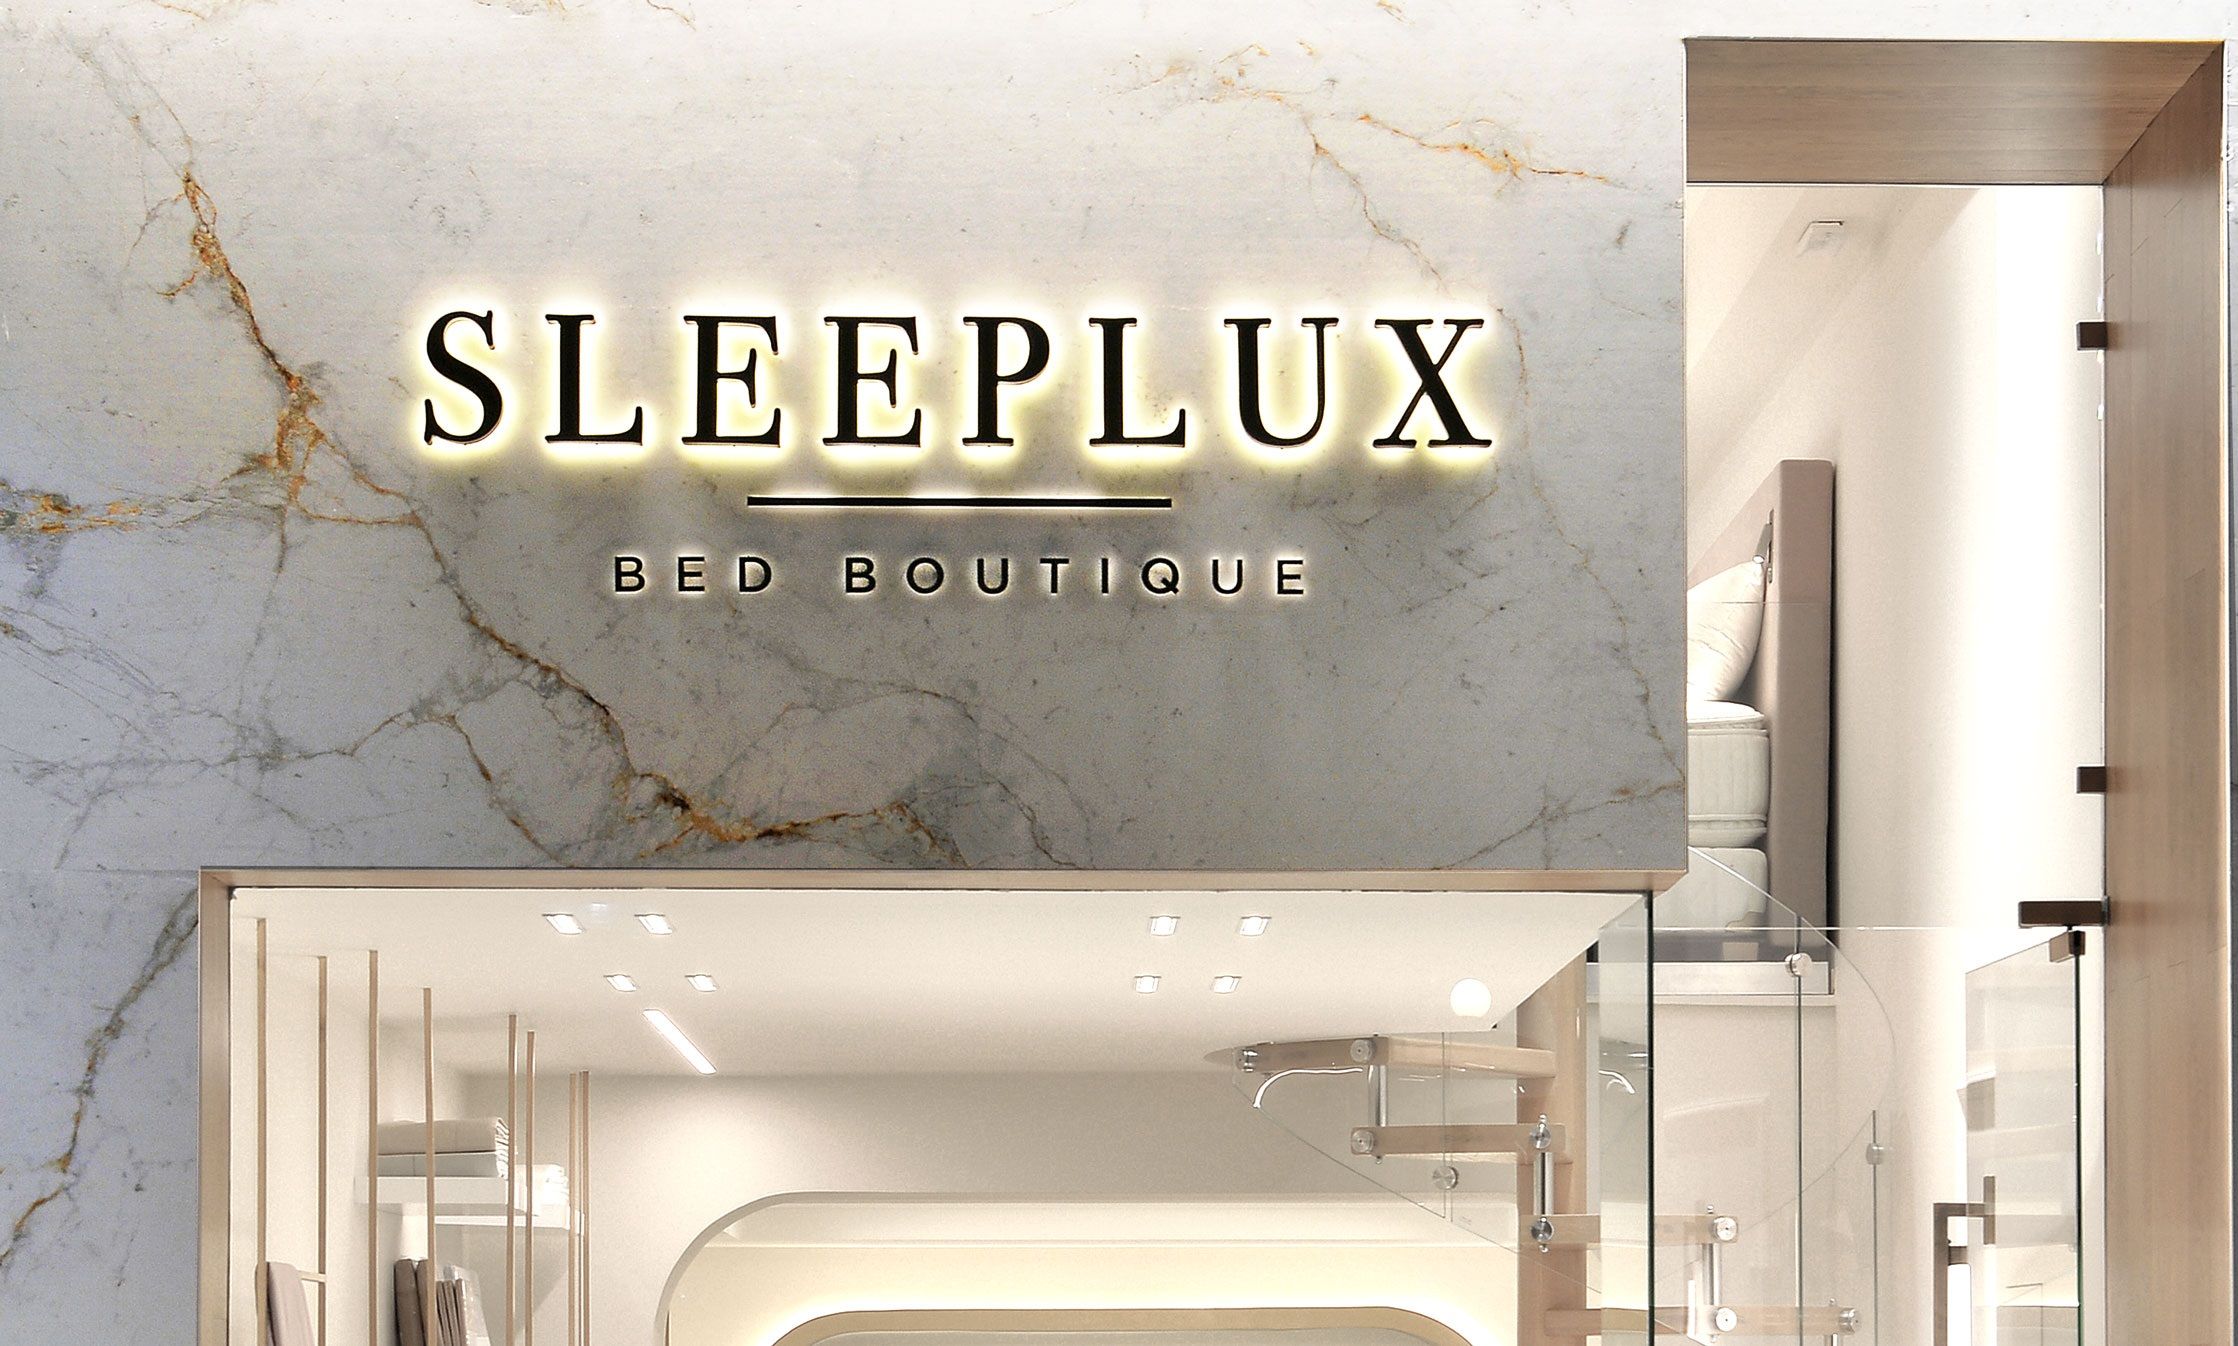 sleep lux bed boutique kifisia store